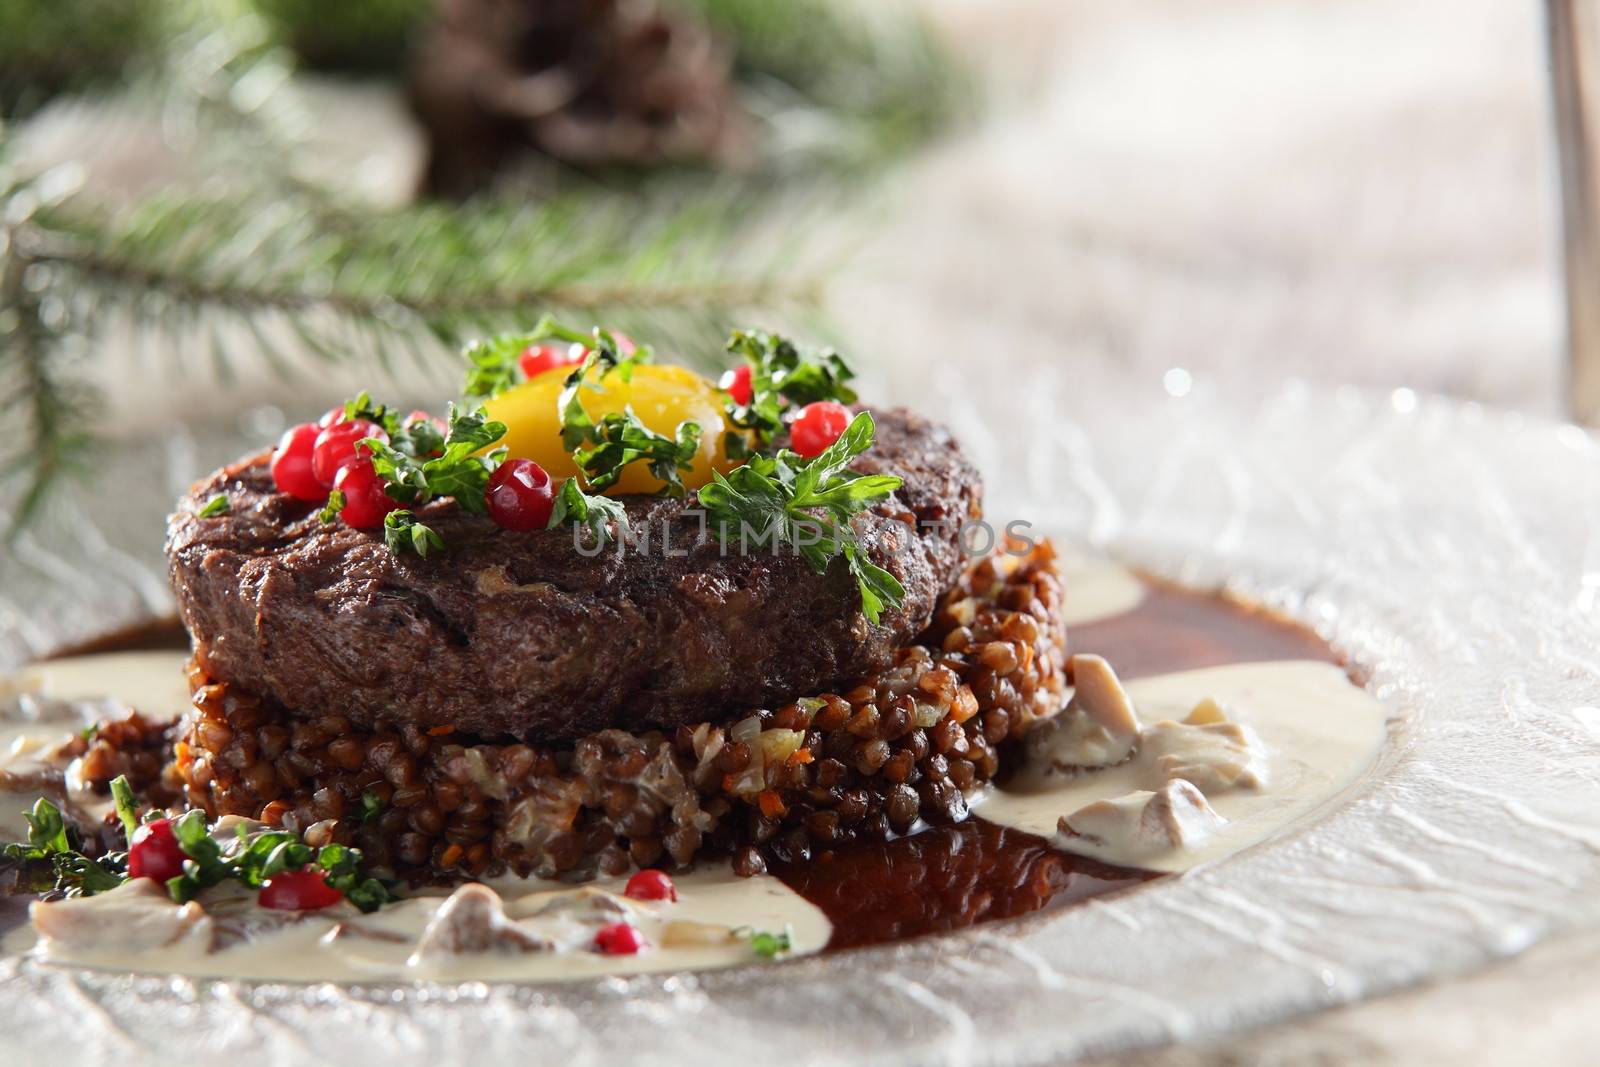 roasted meat on transparent dish by fiphoto